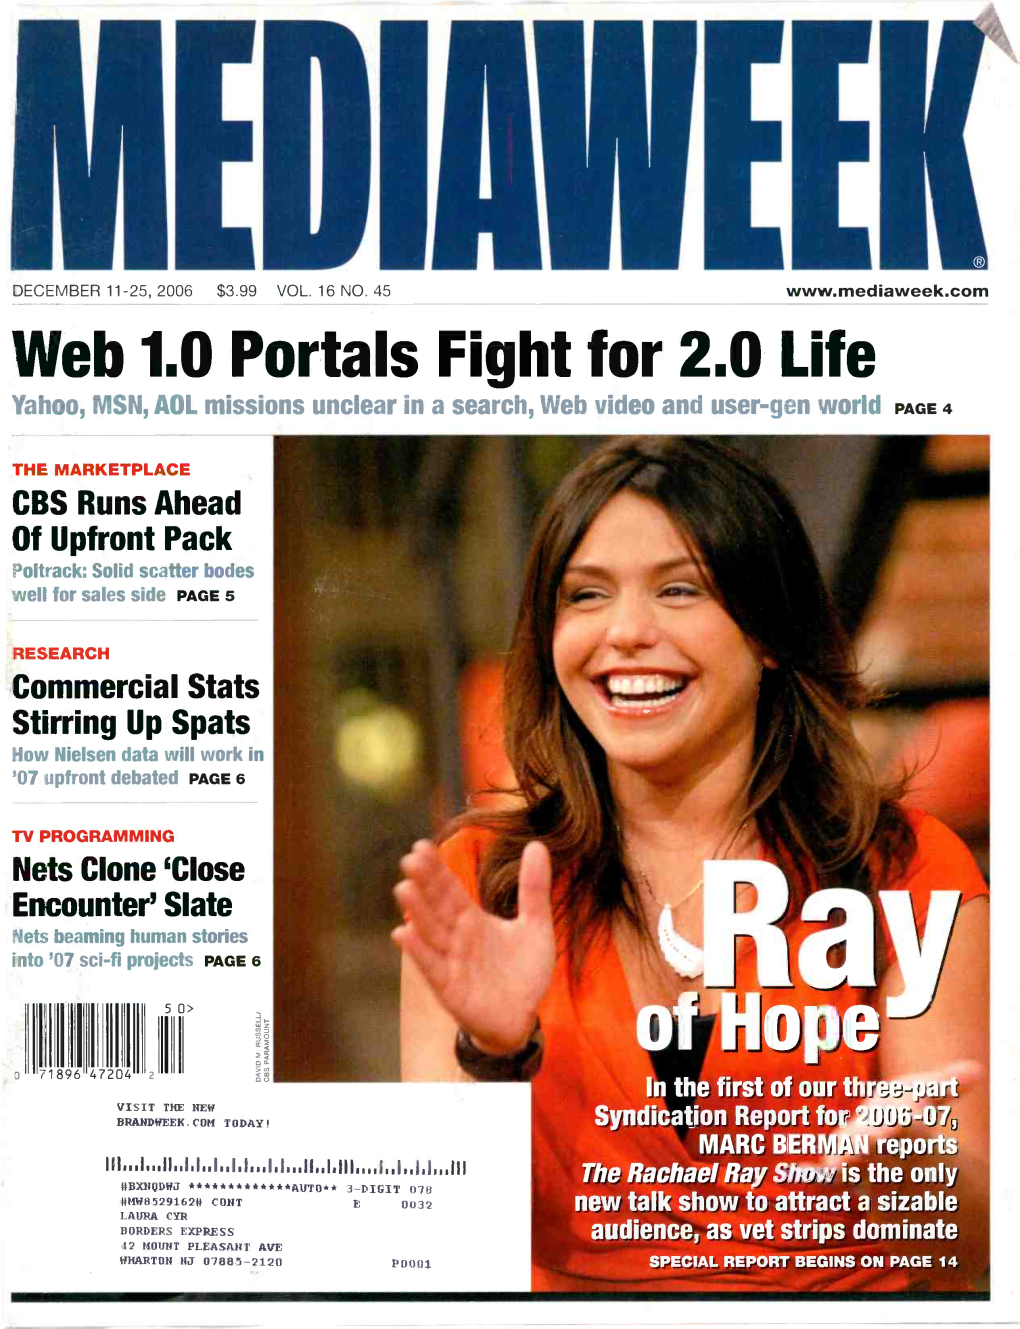 Web 1.0 Portals Fight for 2.0 Life Yahoo, MSN, AOL Missions Unclear in a Search, Web Video and User-Gen World PAGE 4